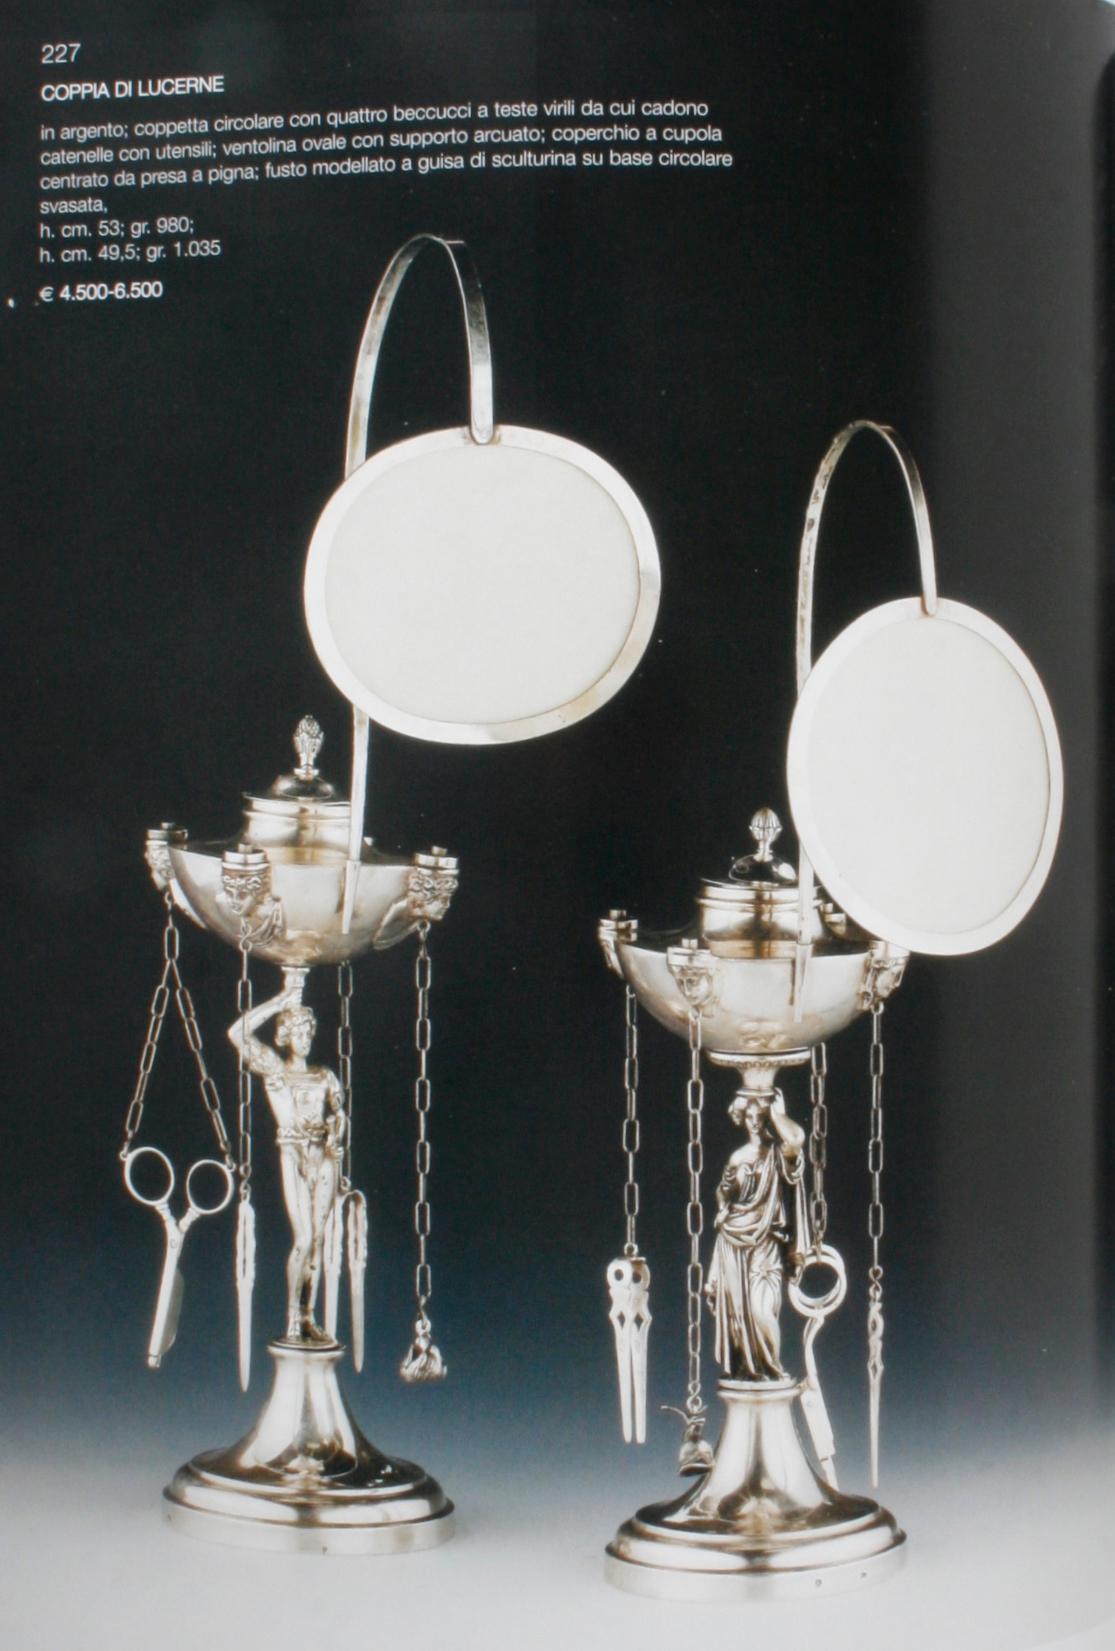 Auction Catalogue of Italian Fine Art, Silver, Ivory, and Venetian Objects, 2006 For Sale 8